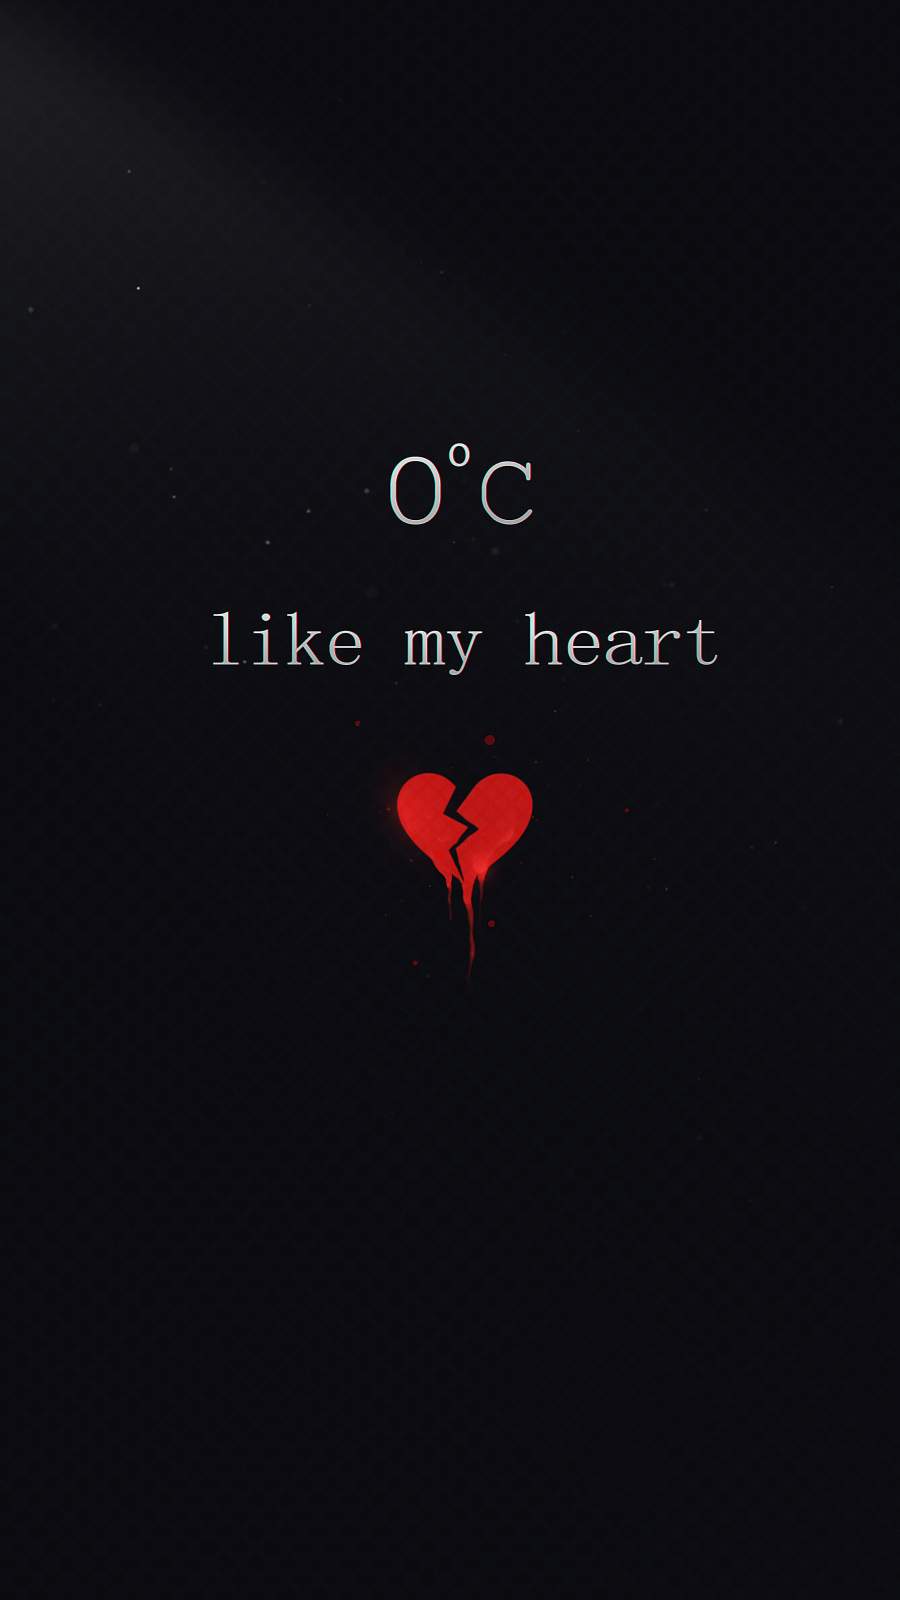 Cold hearted iphone wallpaper